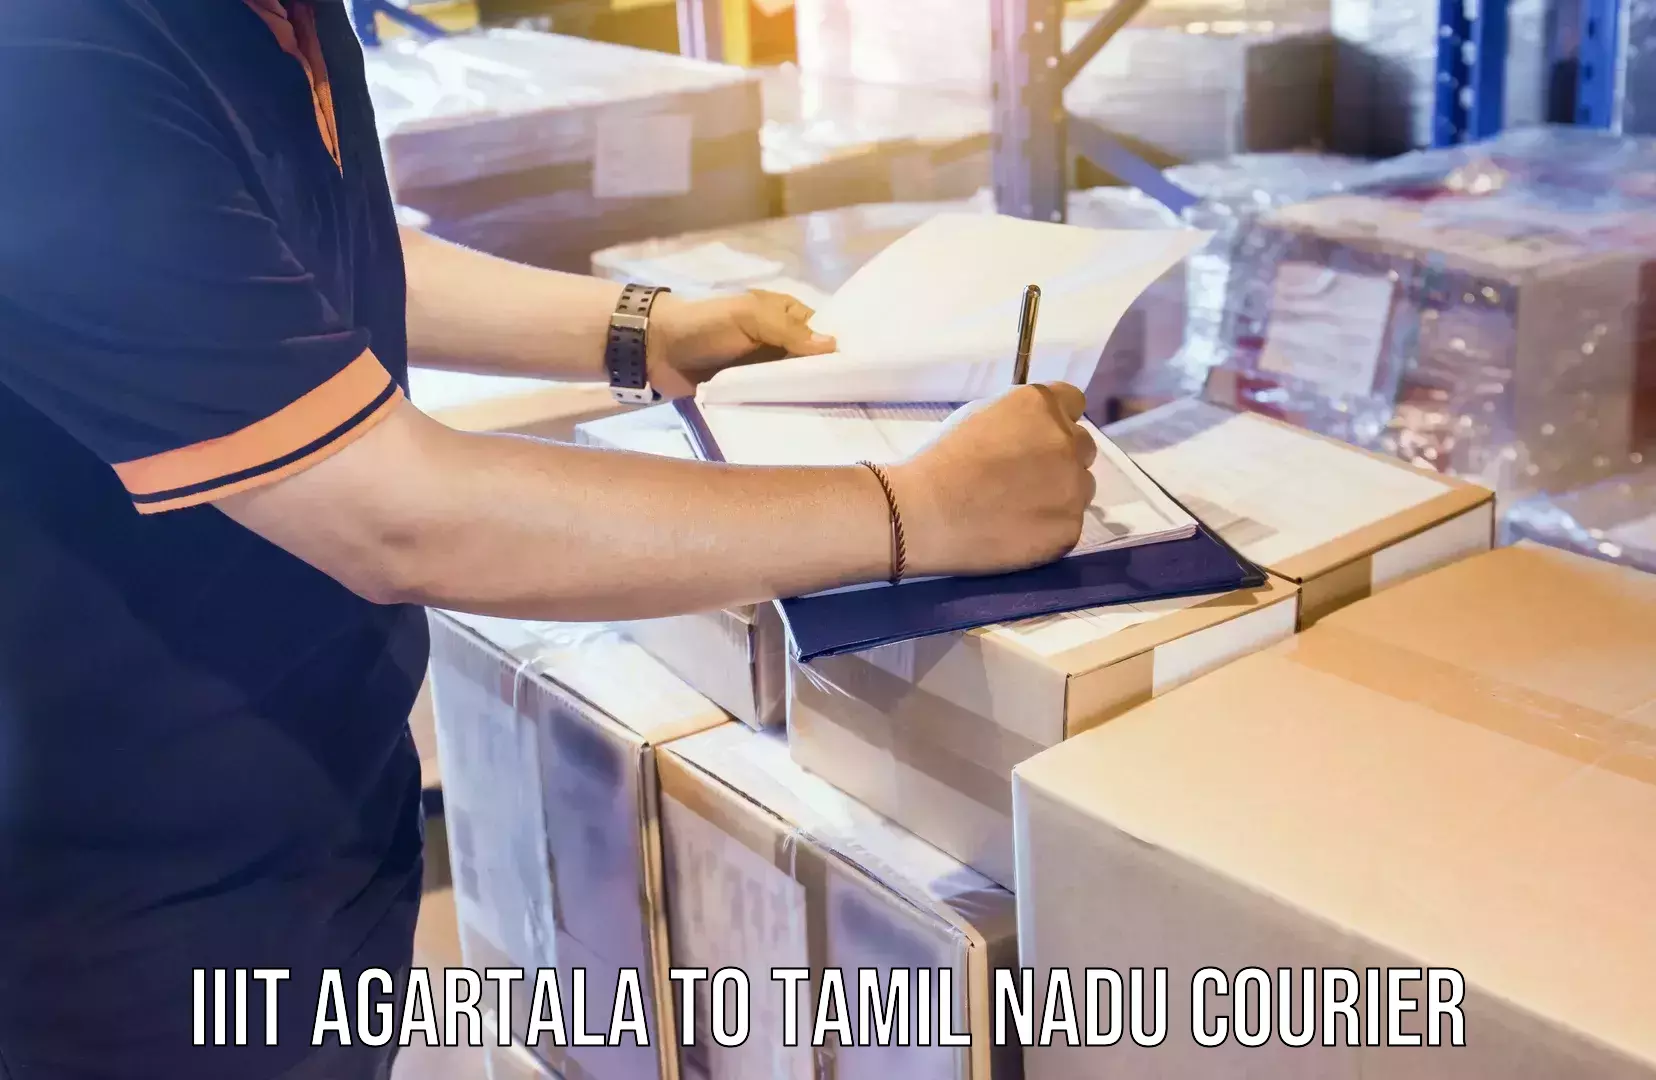 Round-the-clock parcel delivery in IIIT Agartala to Tamil Nadu